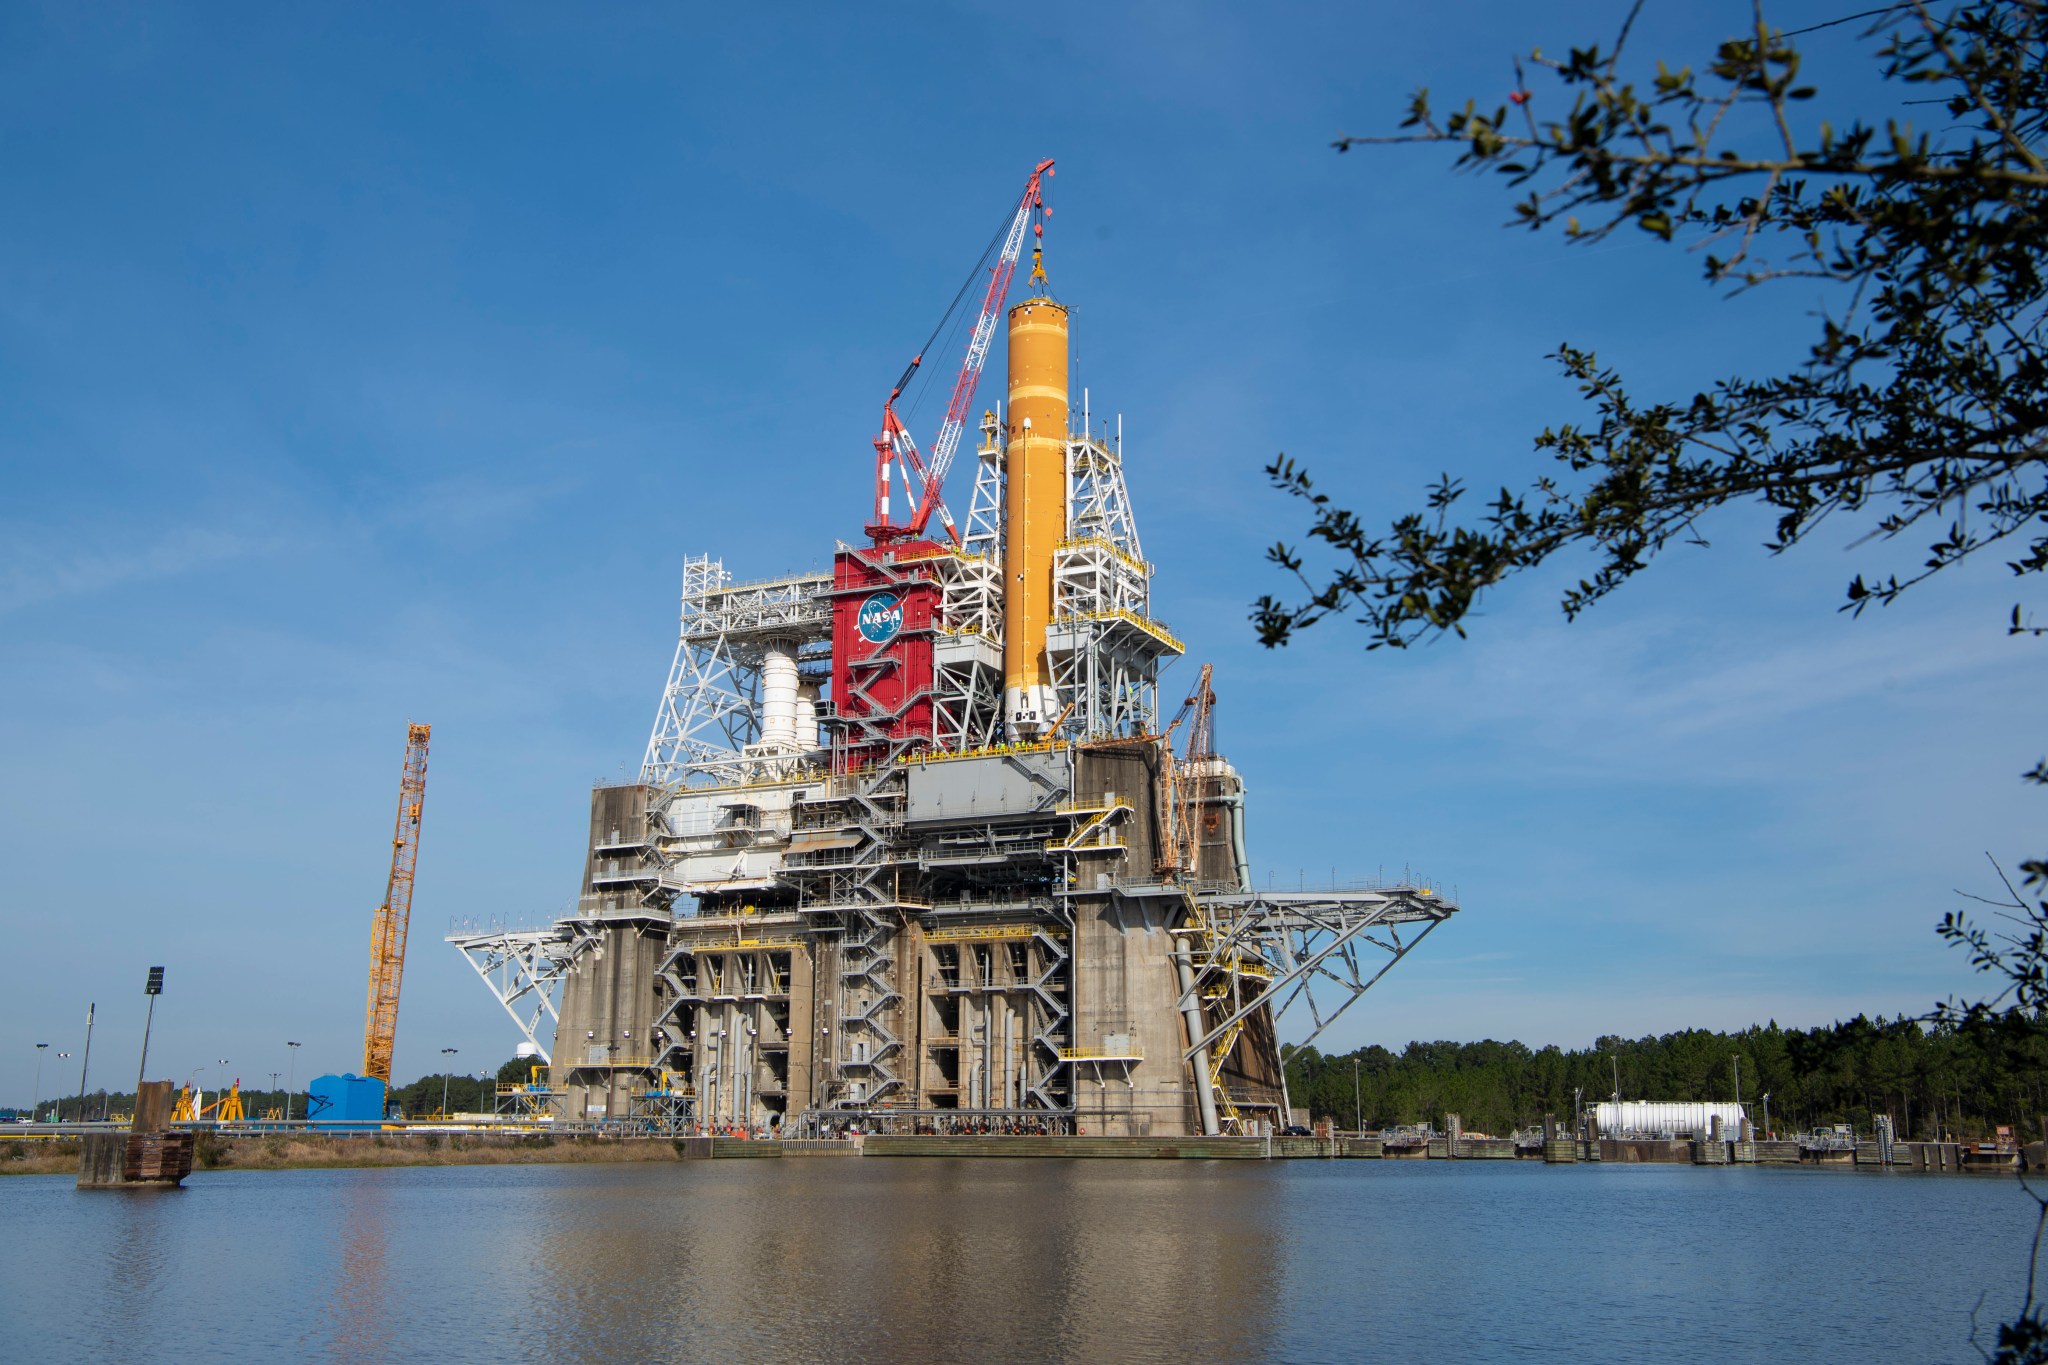 Core Stage for NASA Moon Rocket Ready for SLS Green Run Testing